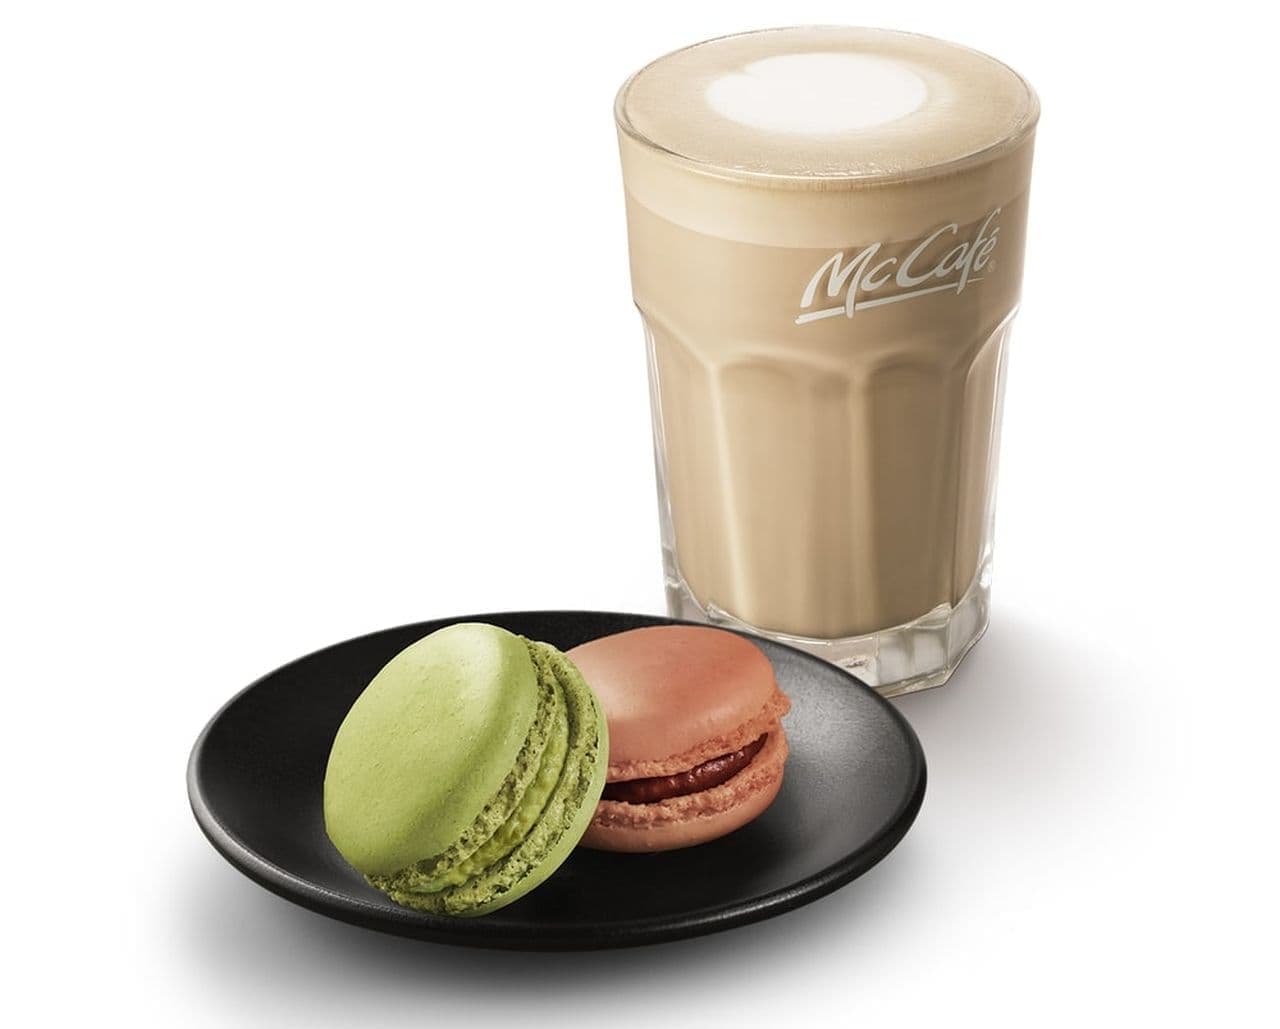 Maccafe by Barista "Special Macaroon Set